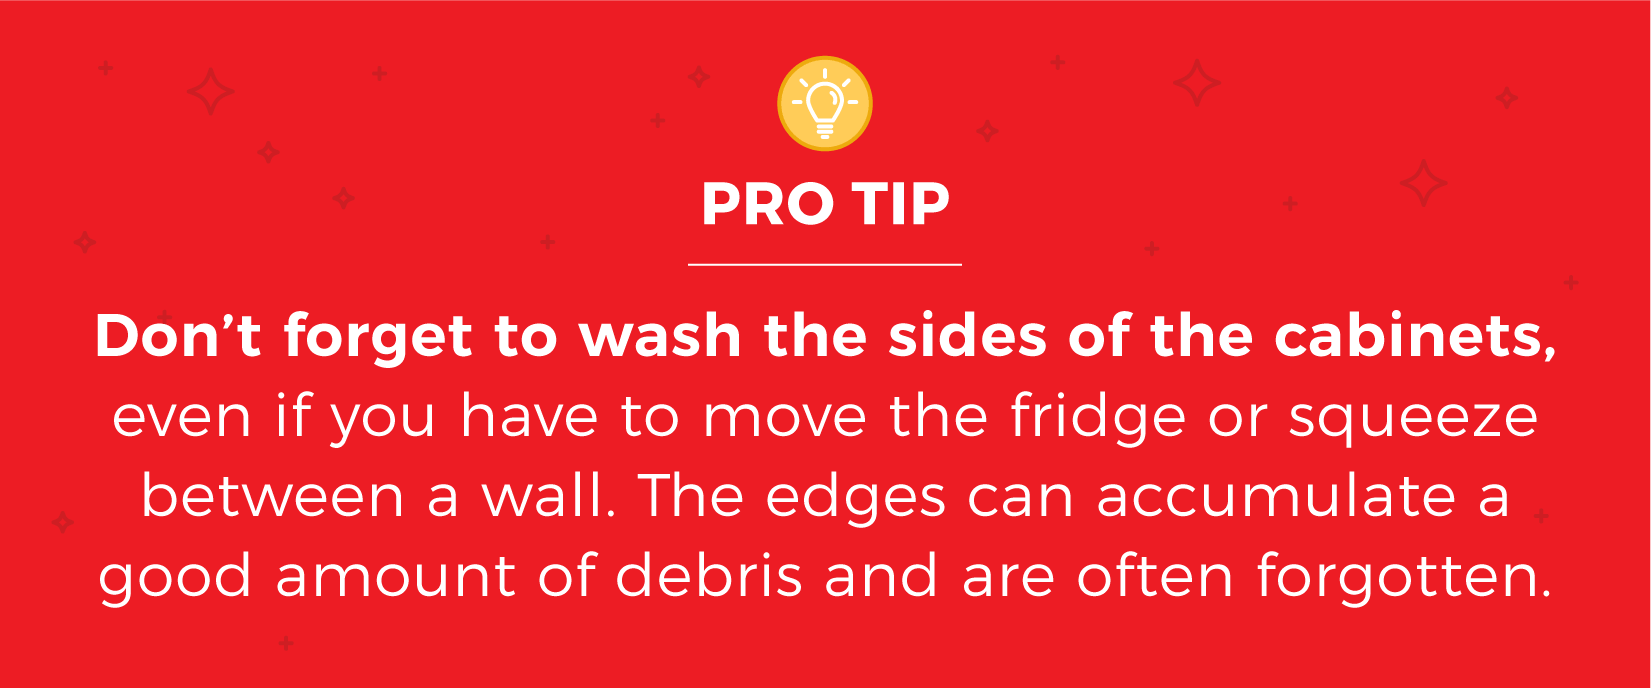 Image text reads: don’t forget to wash the sides of the cabinets, even if you have to move the fridge or squeeze between a wall. The edges can accumulate a good amount of debris and are often forgotten.